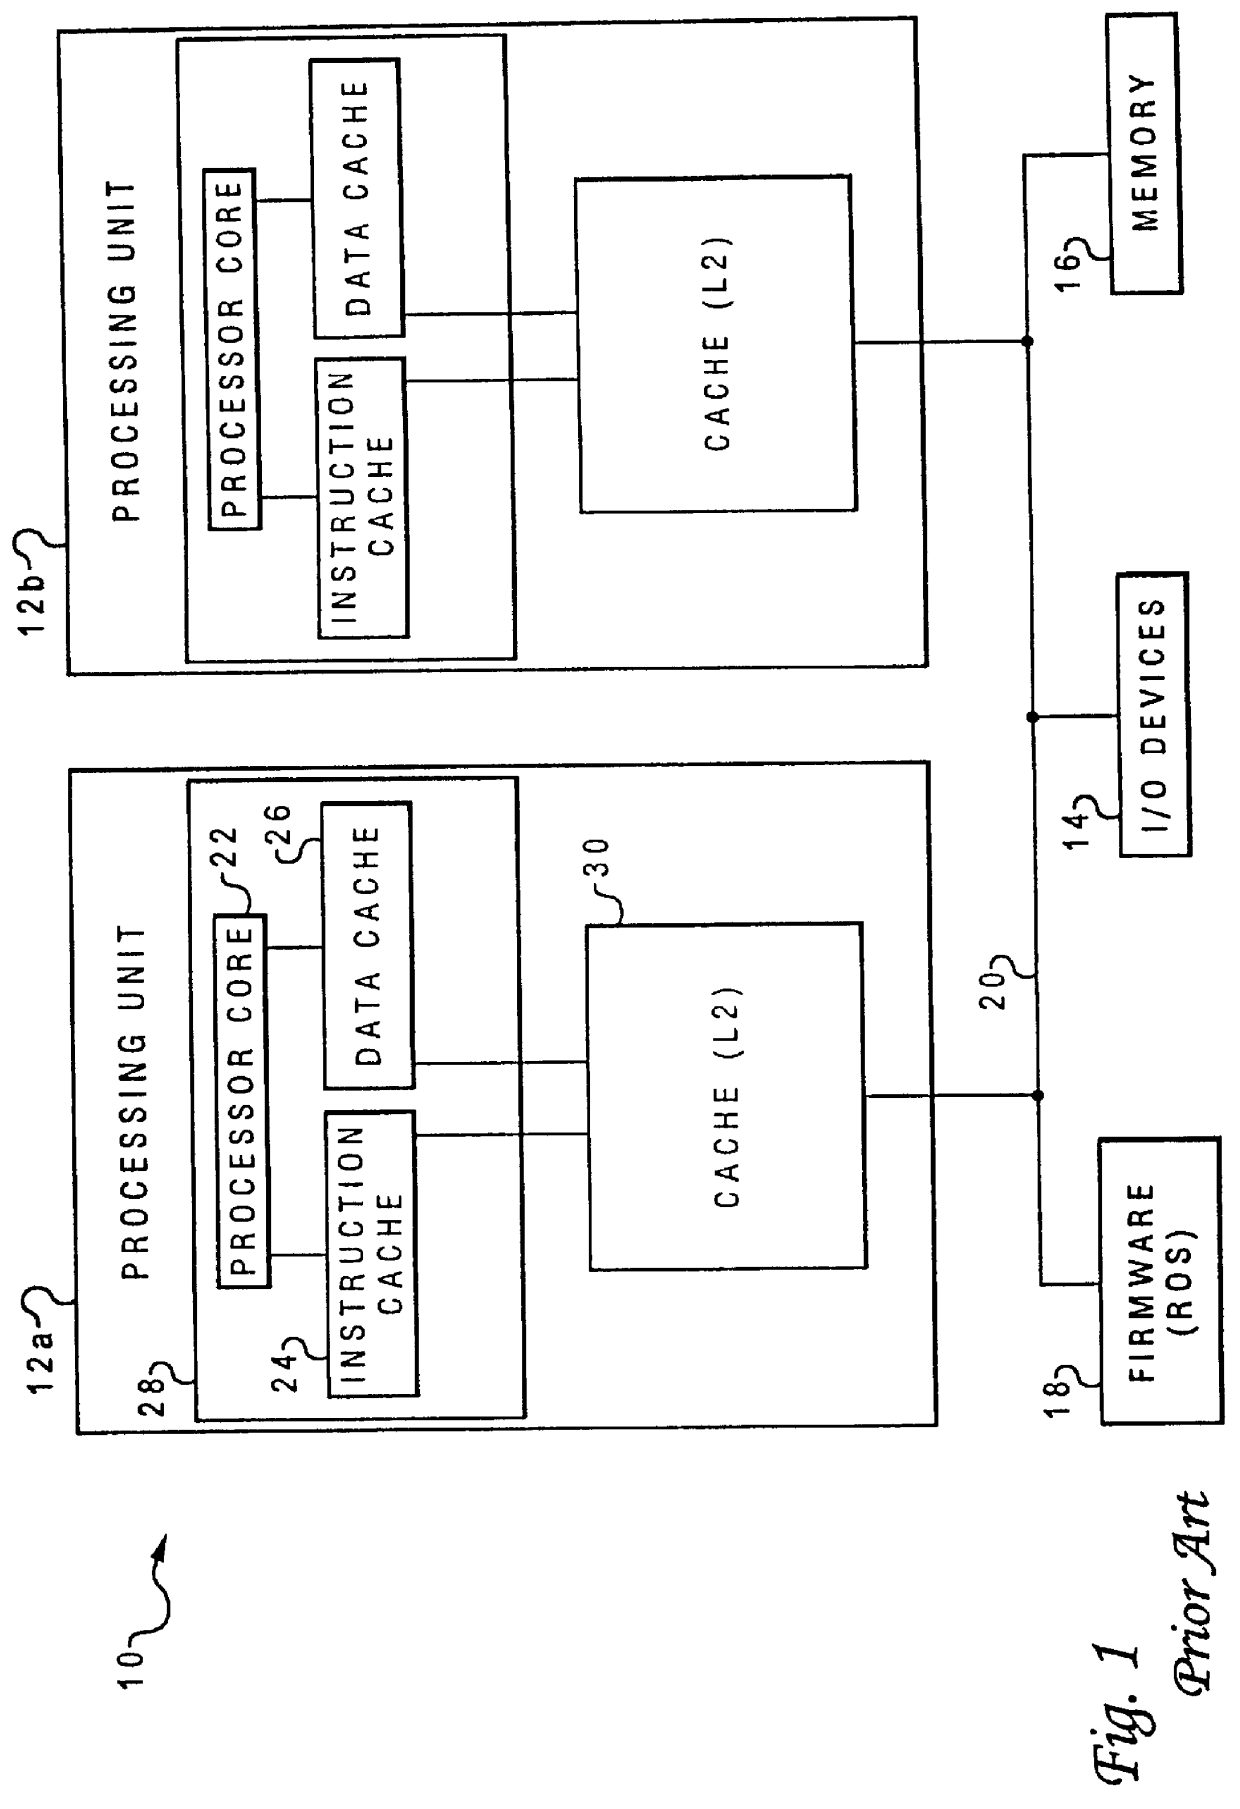 Cache coherency protocol with independent implementation of optimized cache operations